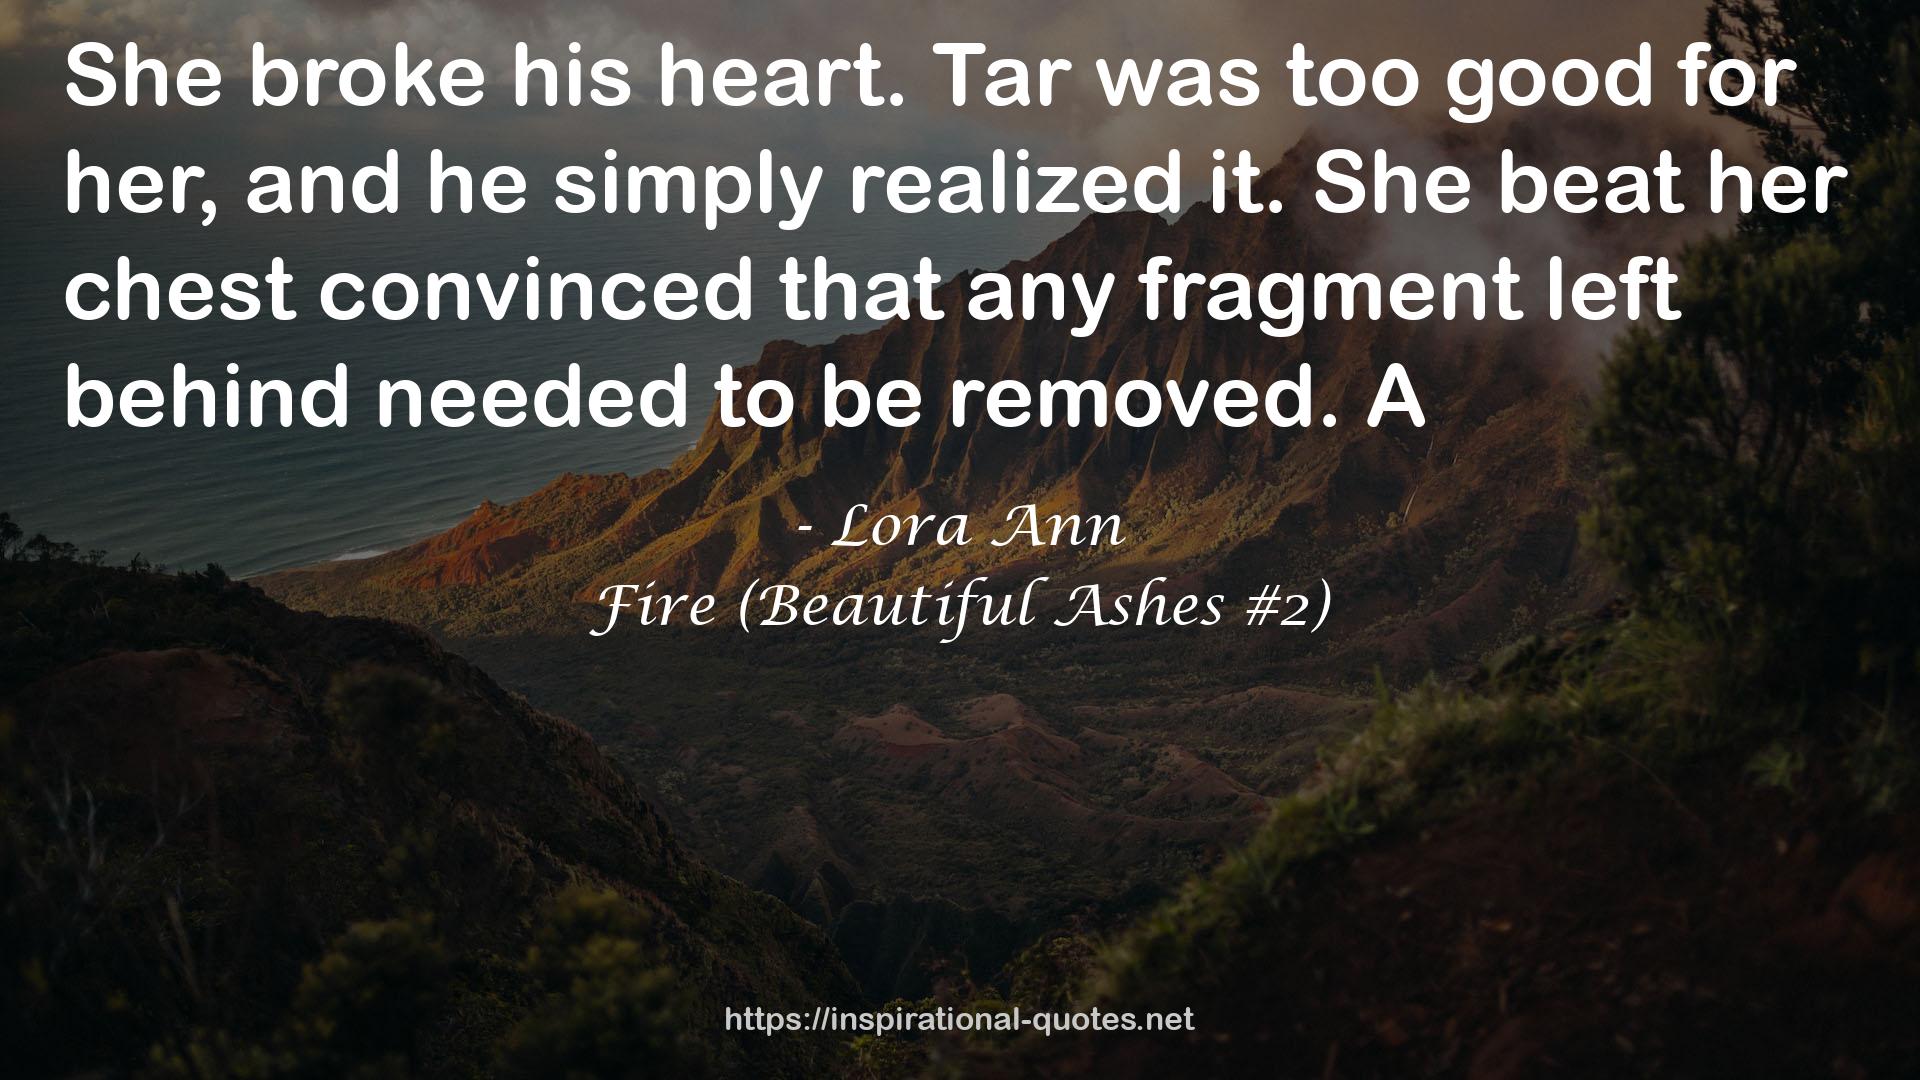 Fire (Beautiful Ashes #2) QUOTES